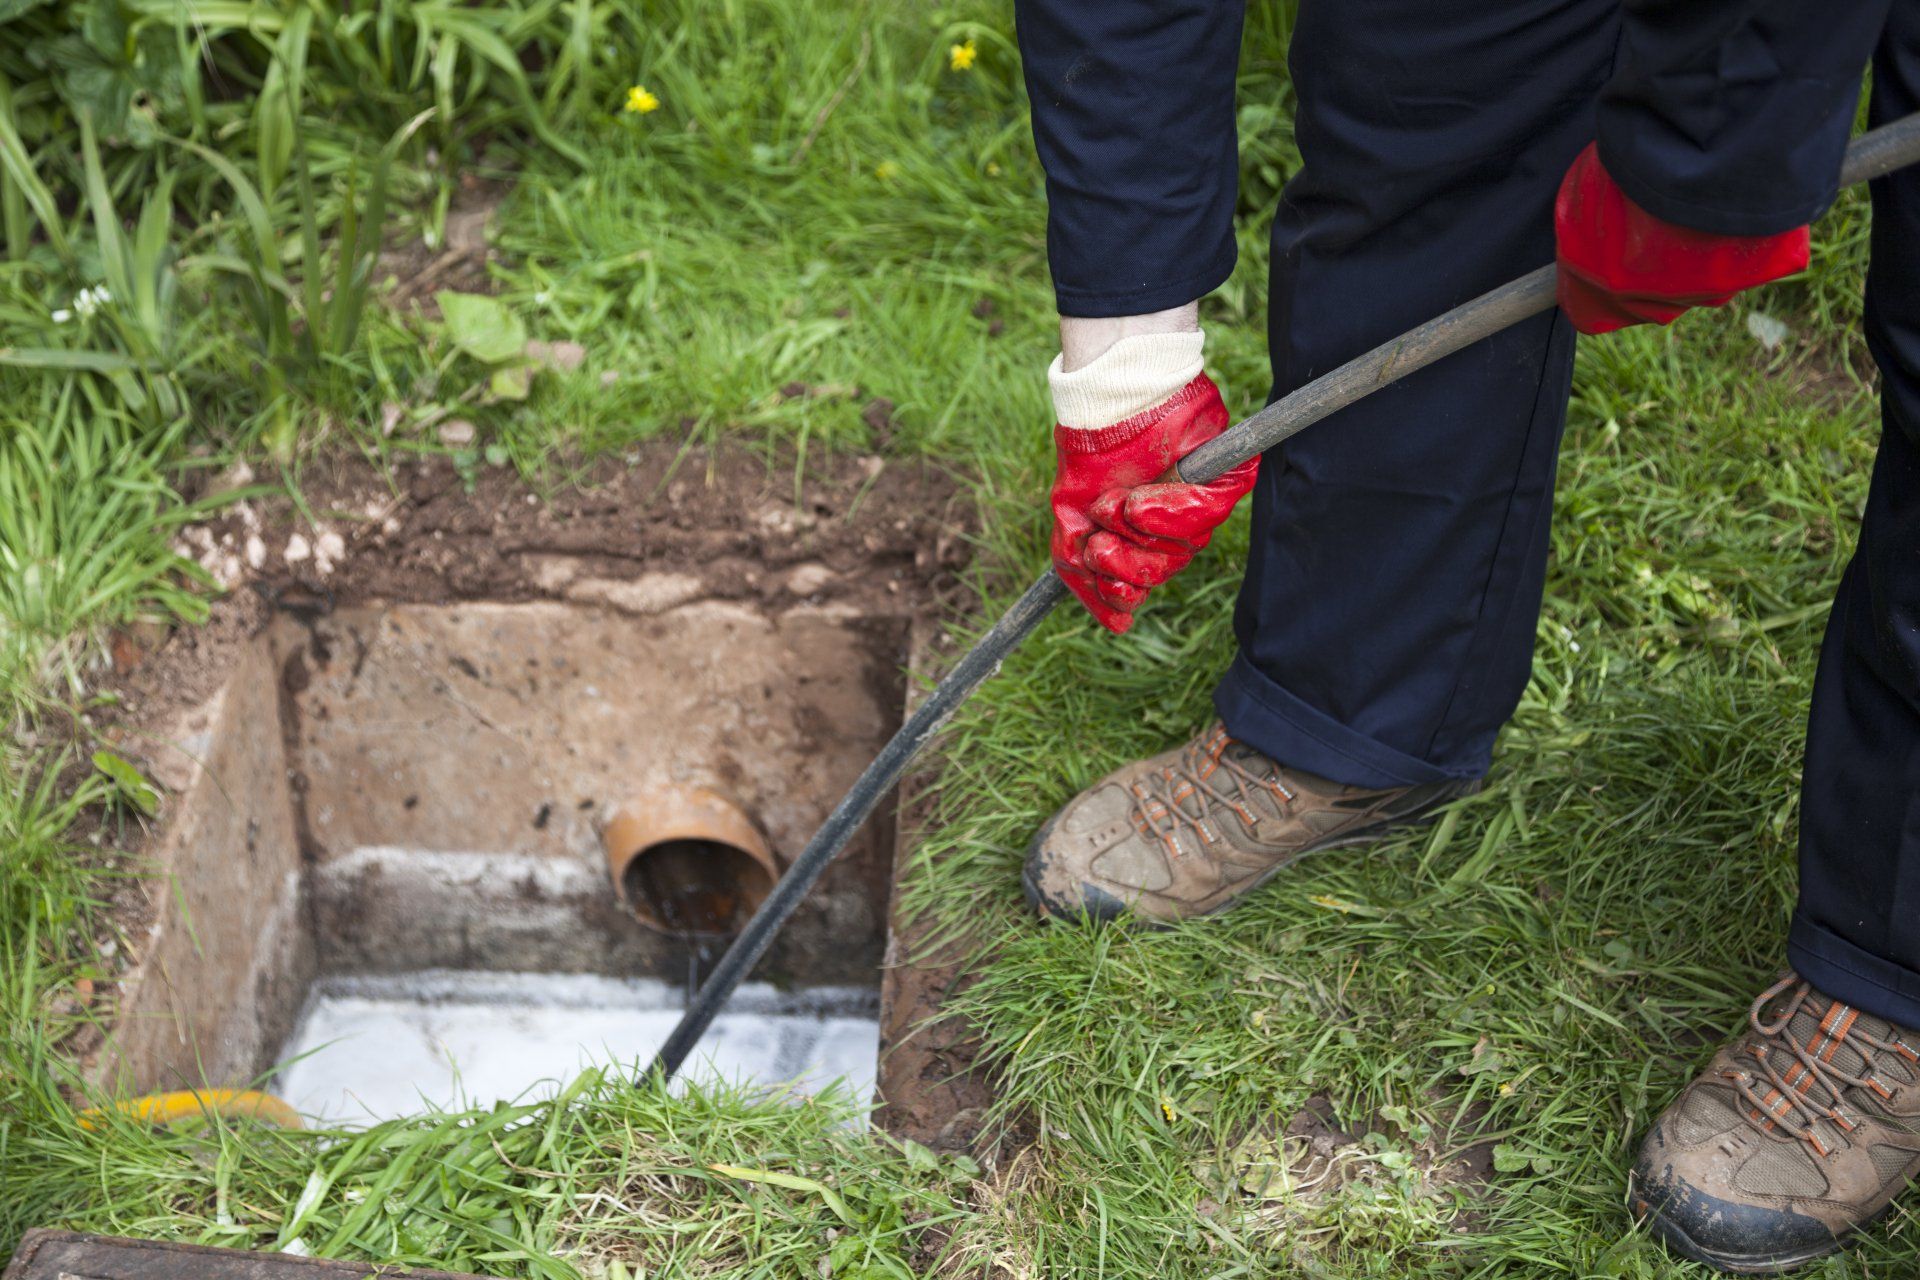 Plumber Unblock A Drain With A Tool — Sierra Vista, AZ — Roto Rooter Sewer and Drains